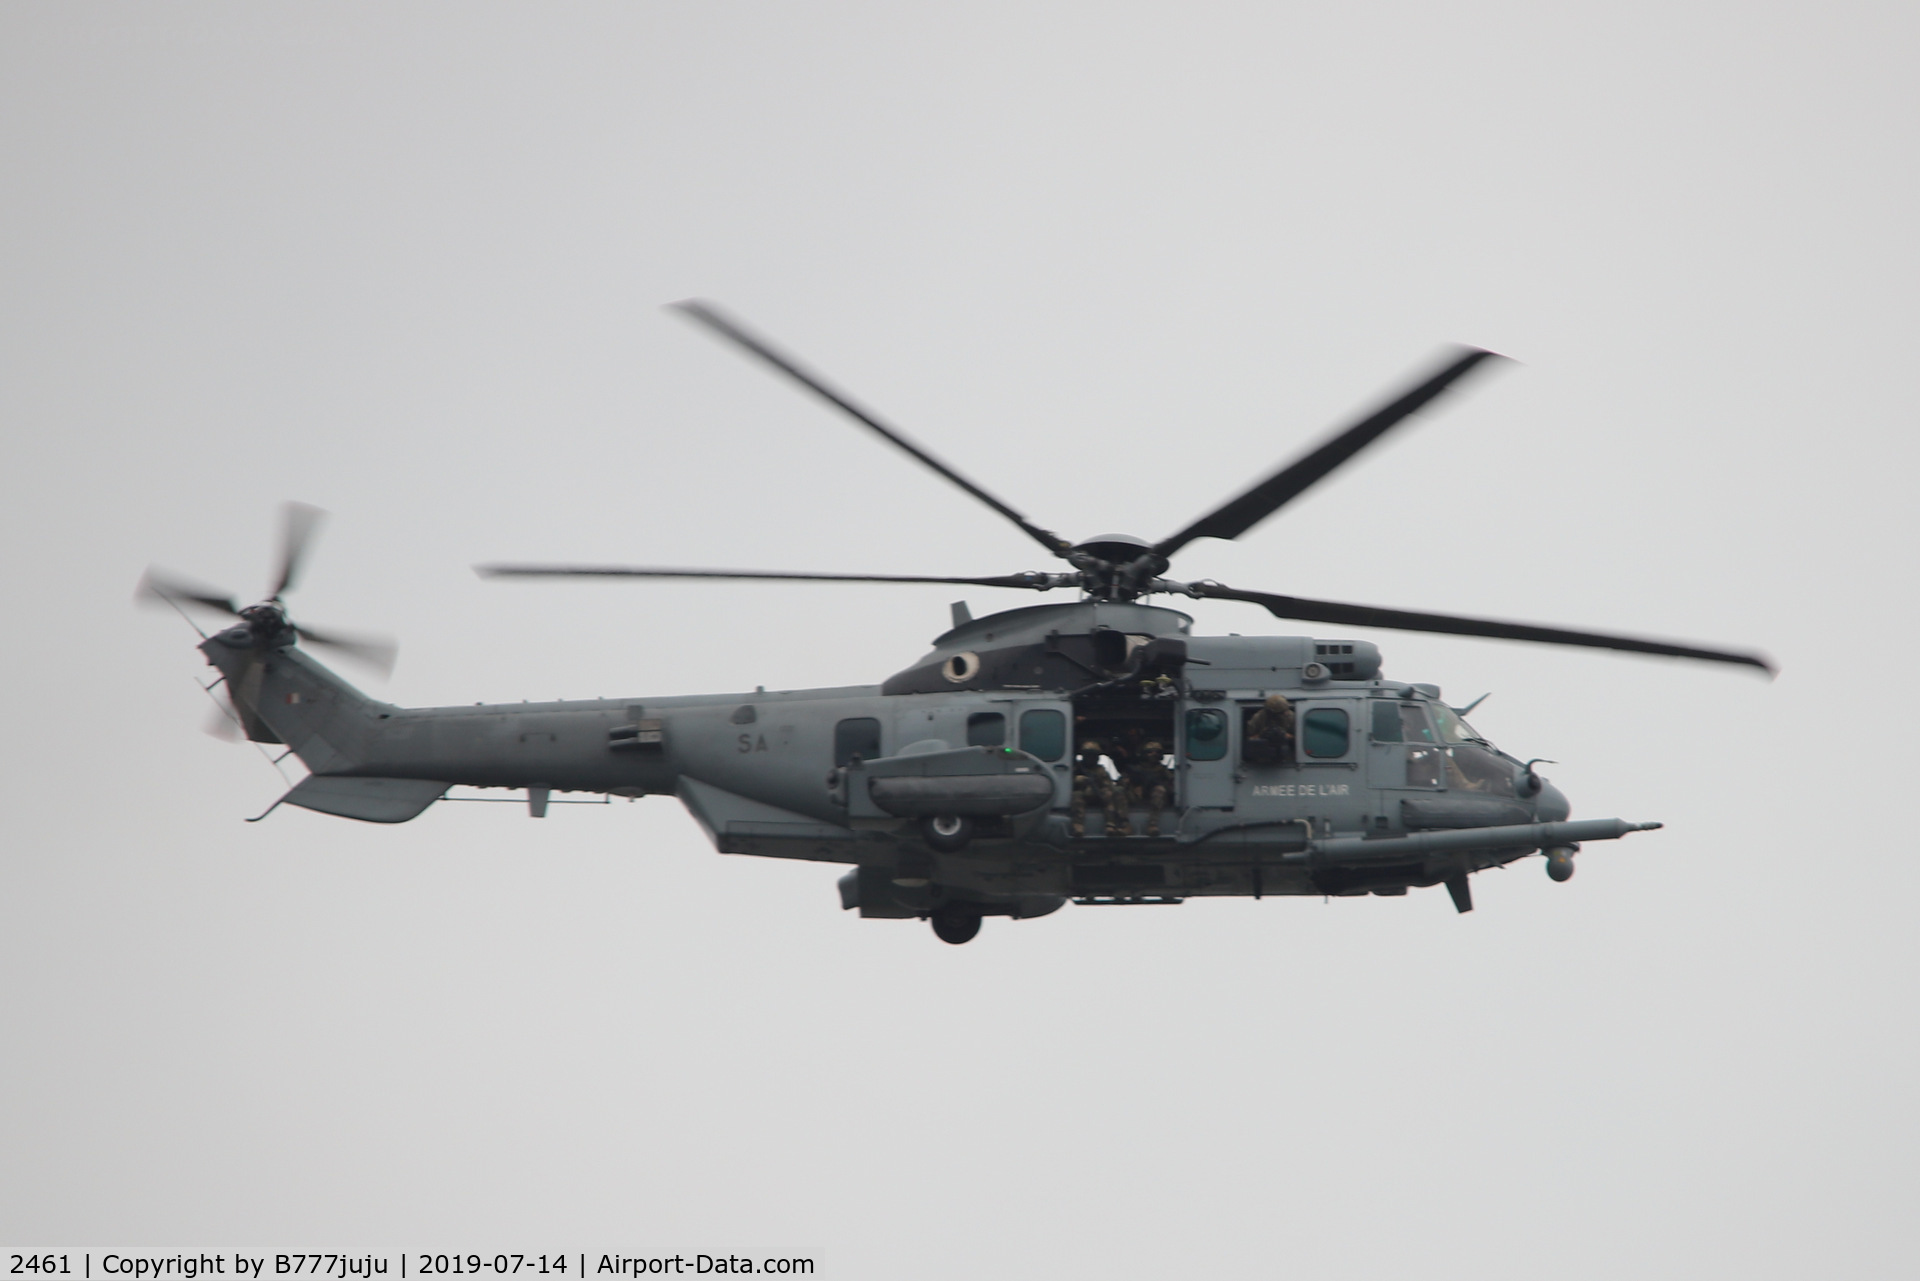 2461, Eurocopter EC-725R2 Caracal C/N 2461, during French Parade over Paris